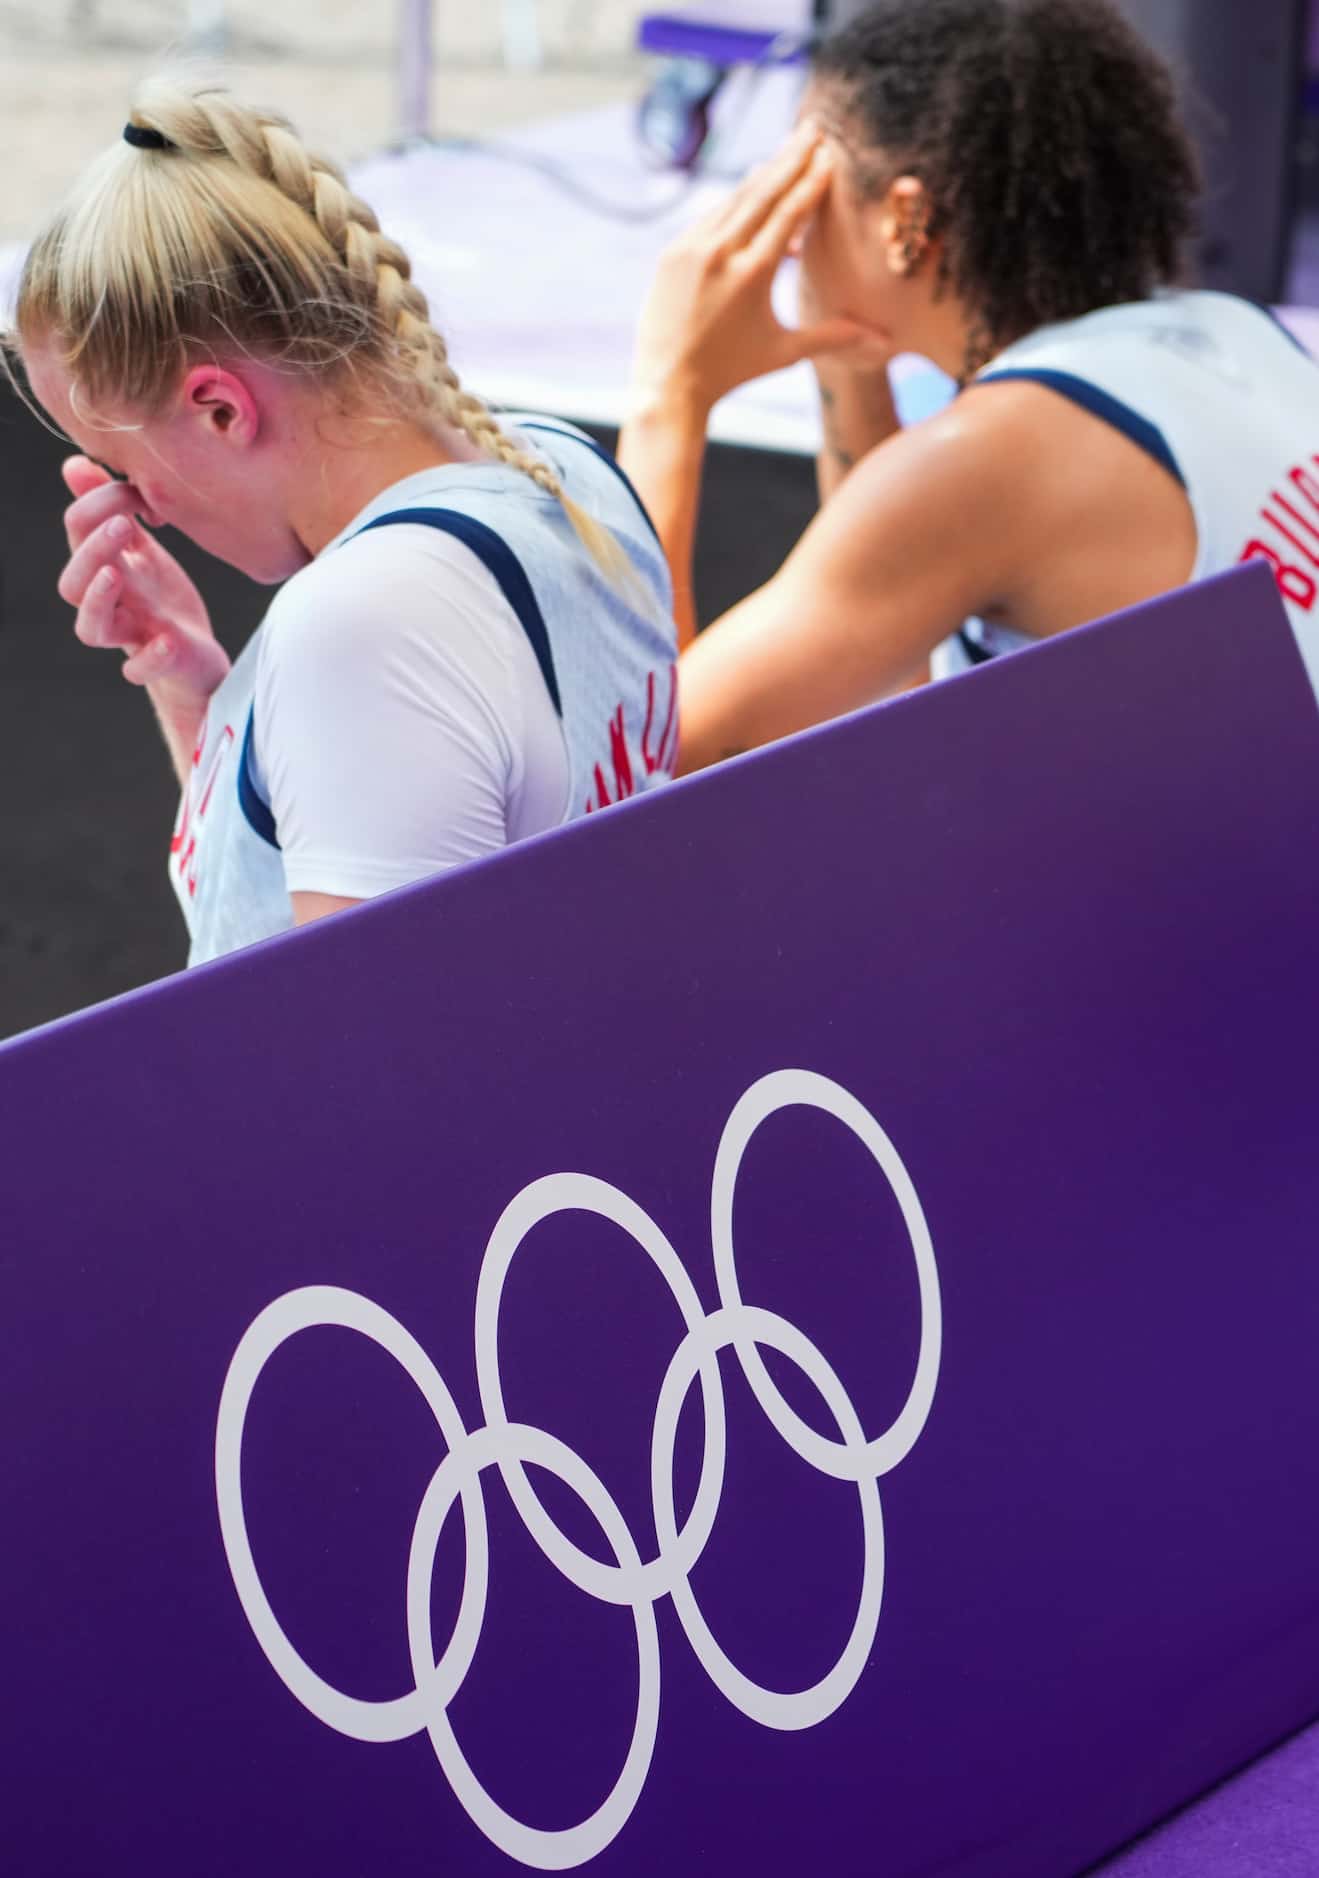 Hailey van Lith (left) and Cierra Burdick of the United States sit near the court after a...